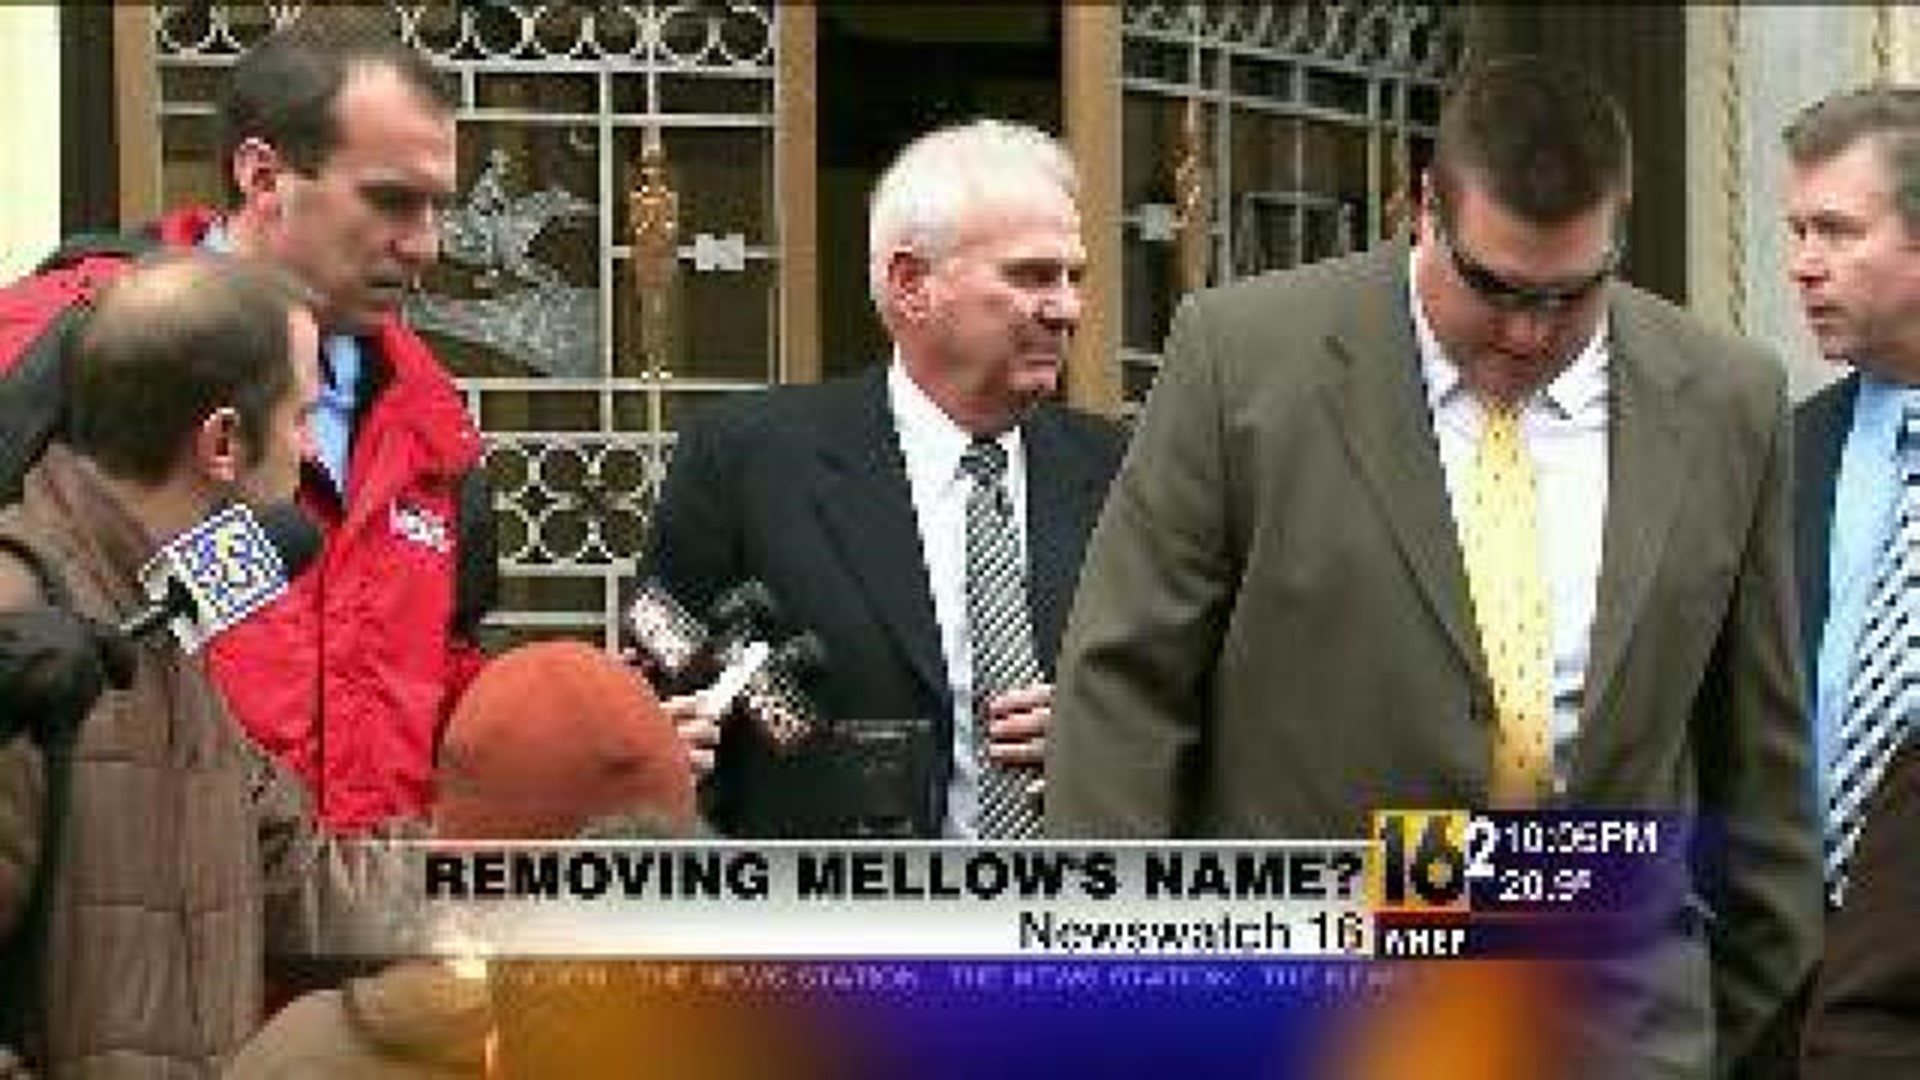 Blakely Residents Want Mellow's Name Off Park